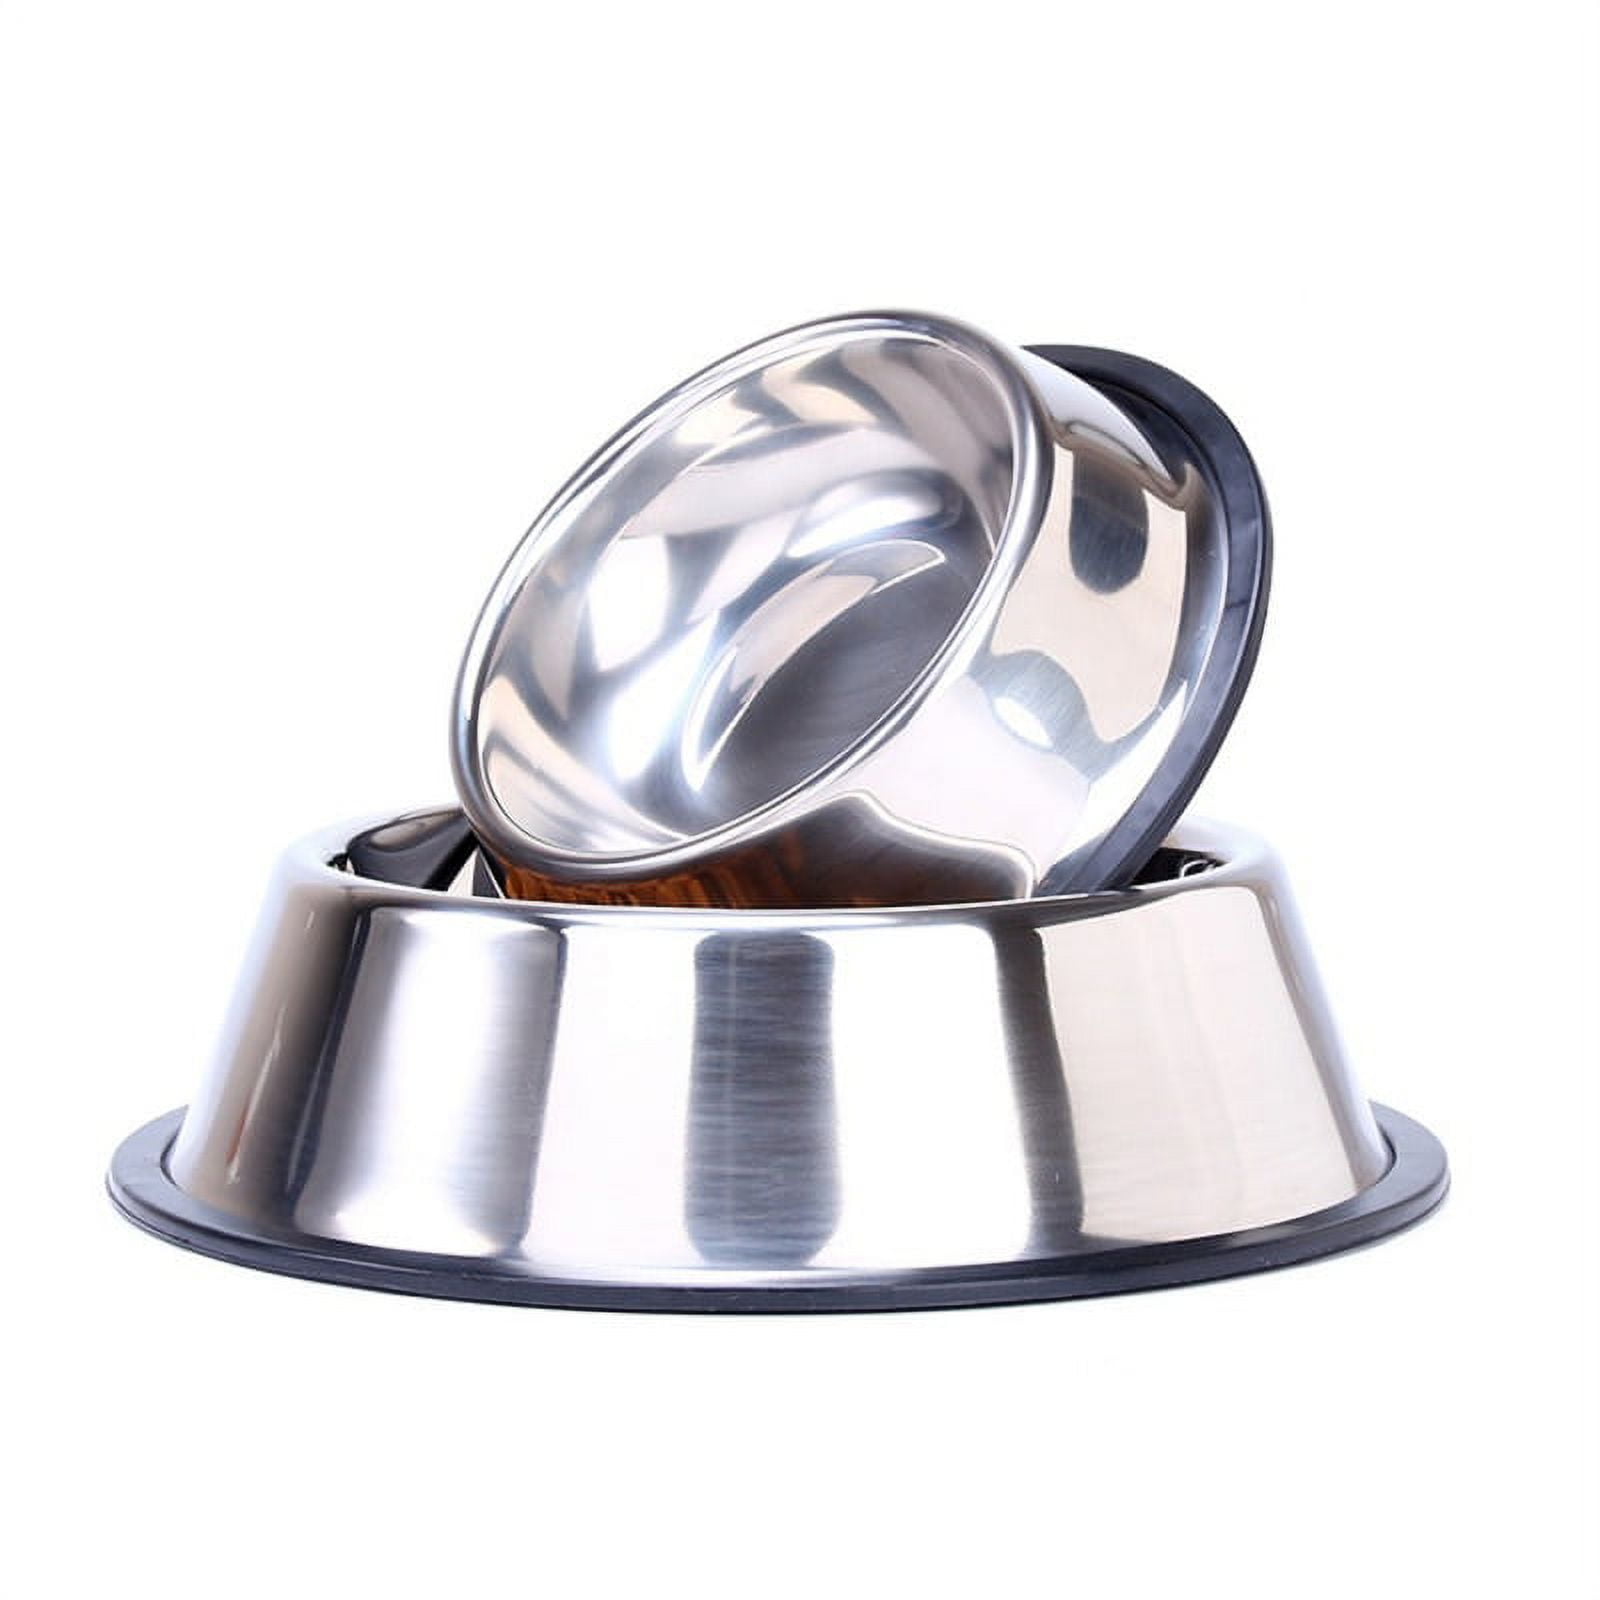 Brand Clearance! Pet Dog Supplies, Pet Senior Bowl, Stainl Steel Bowl for Dogs, Durable and Non-Toxic